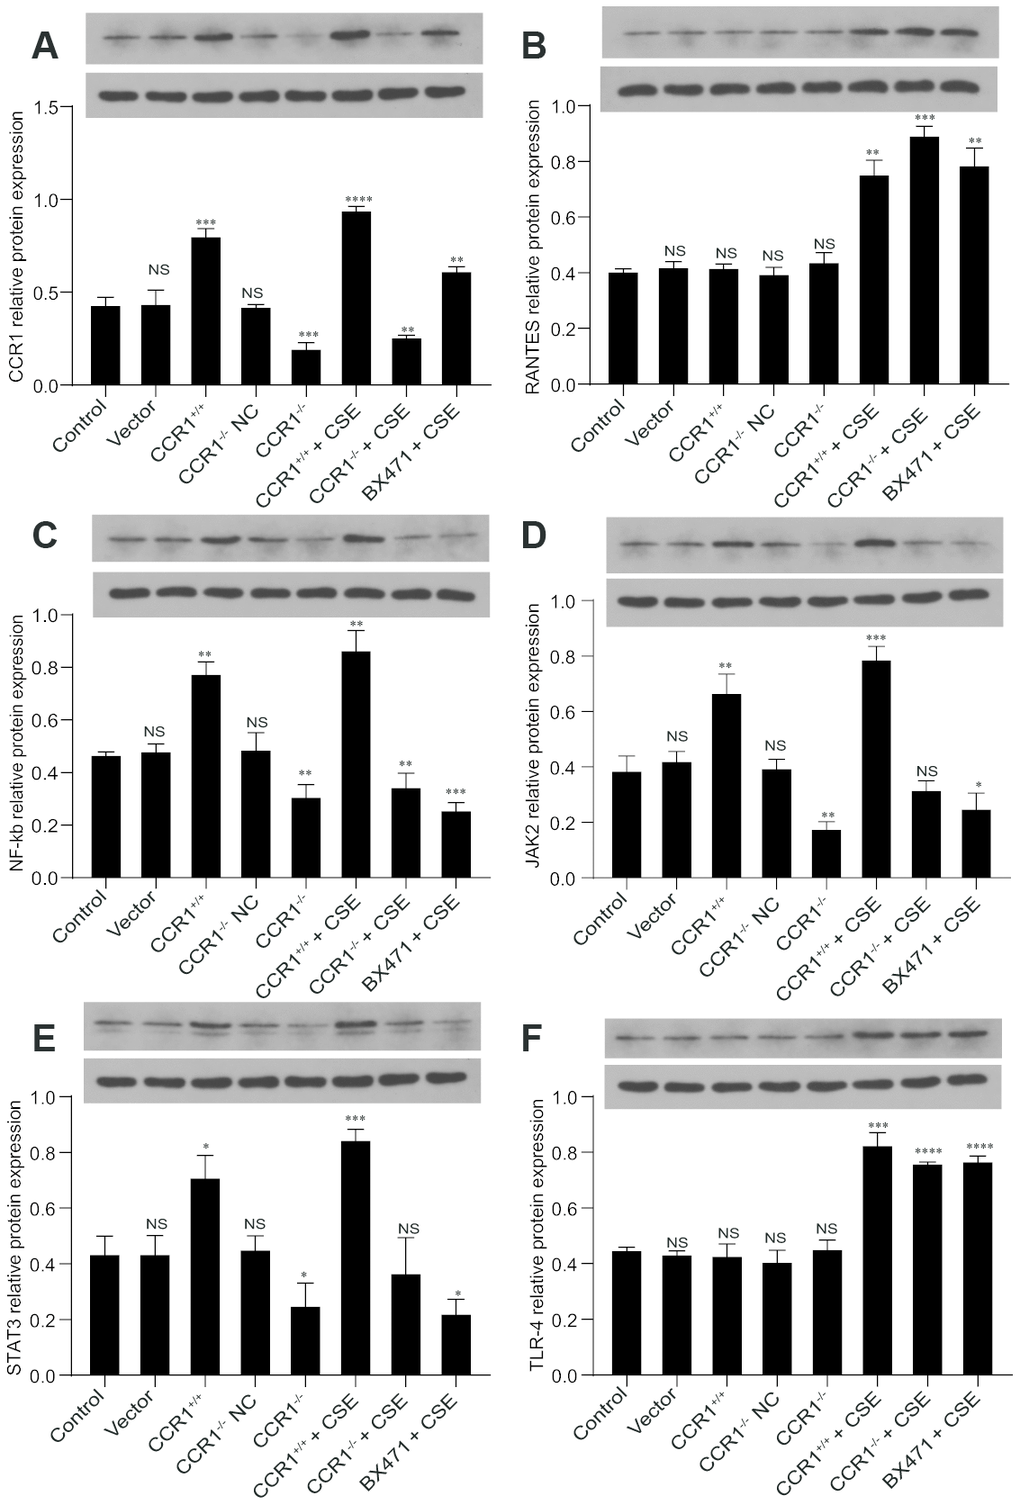 Protein expression of CCR1 and downstream pathways in CSE-induced MH-S cells. (A, C–E) The western blot results show that once the CCR1 protein expression is inhibited, the CCR1/JAK/STAT3/NF-κB protein expression decreases significantly in CSE-induced MH-S cells, (B, F) but not the RANTES and TLR-4.